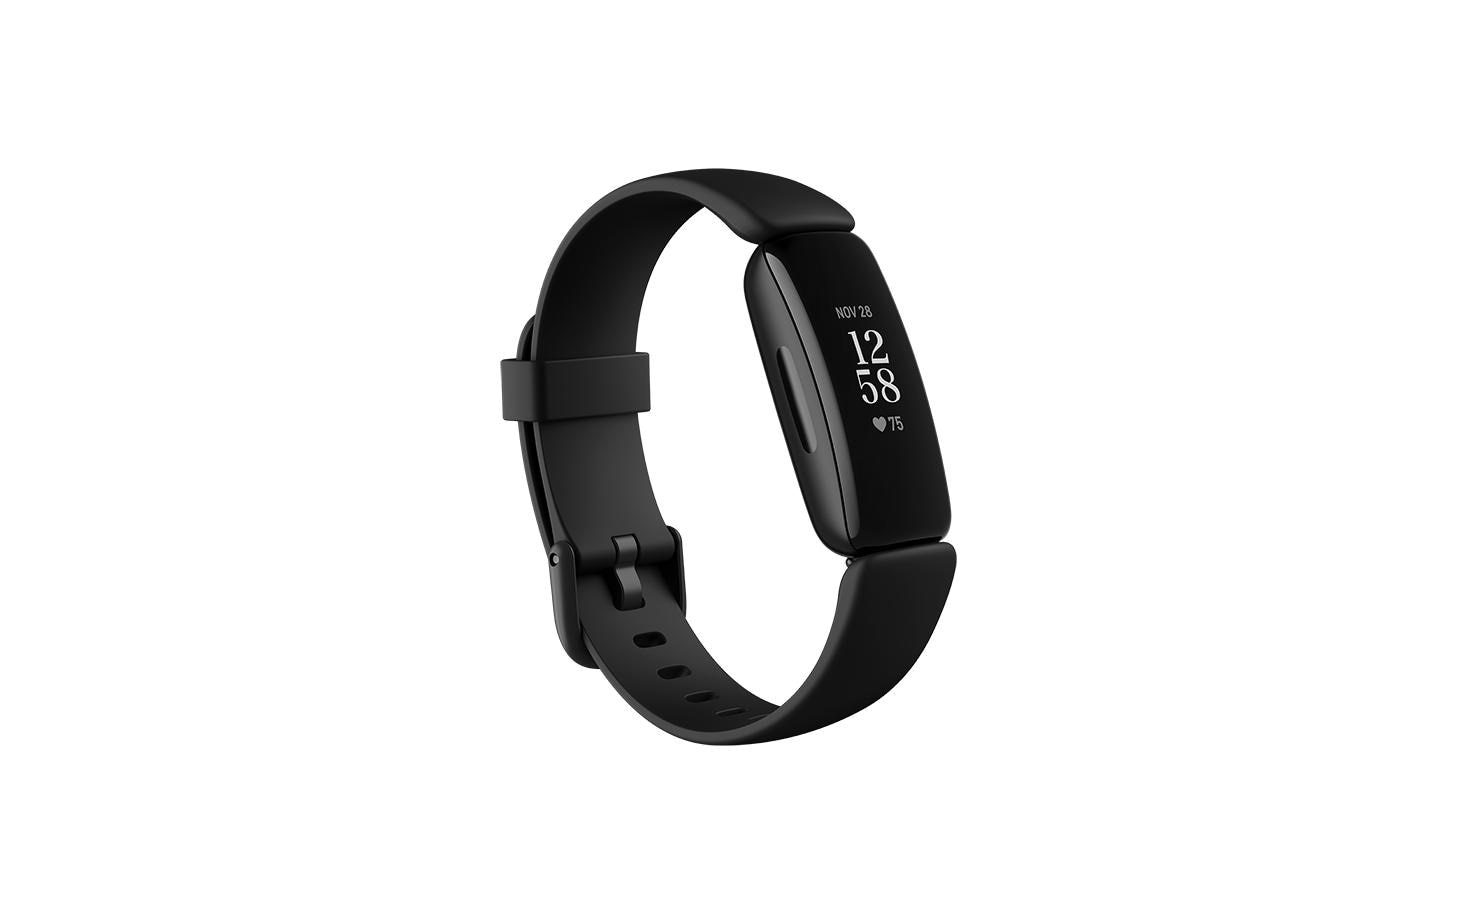 Fitness-Tracker »Fitbit Inspire 2 Wristband activity tracker«